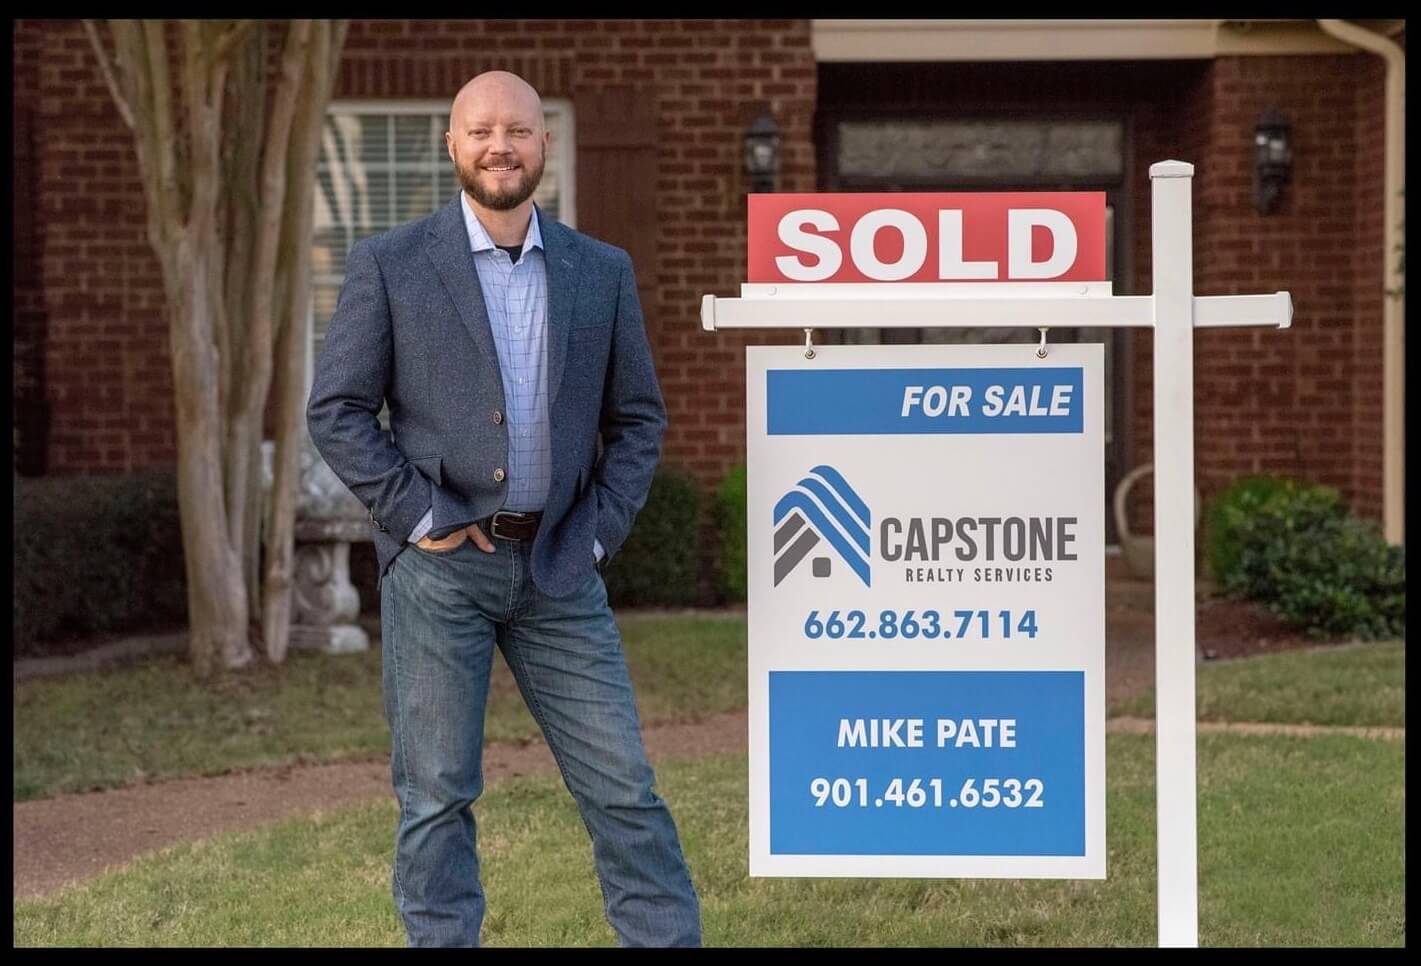 Mike Pate, Capstone Realty